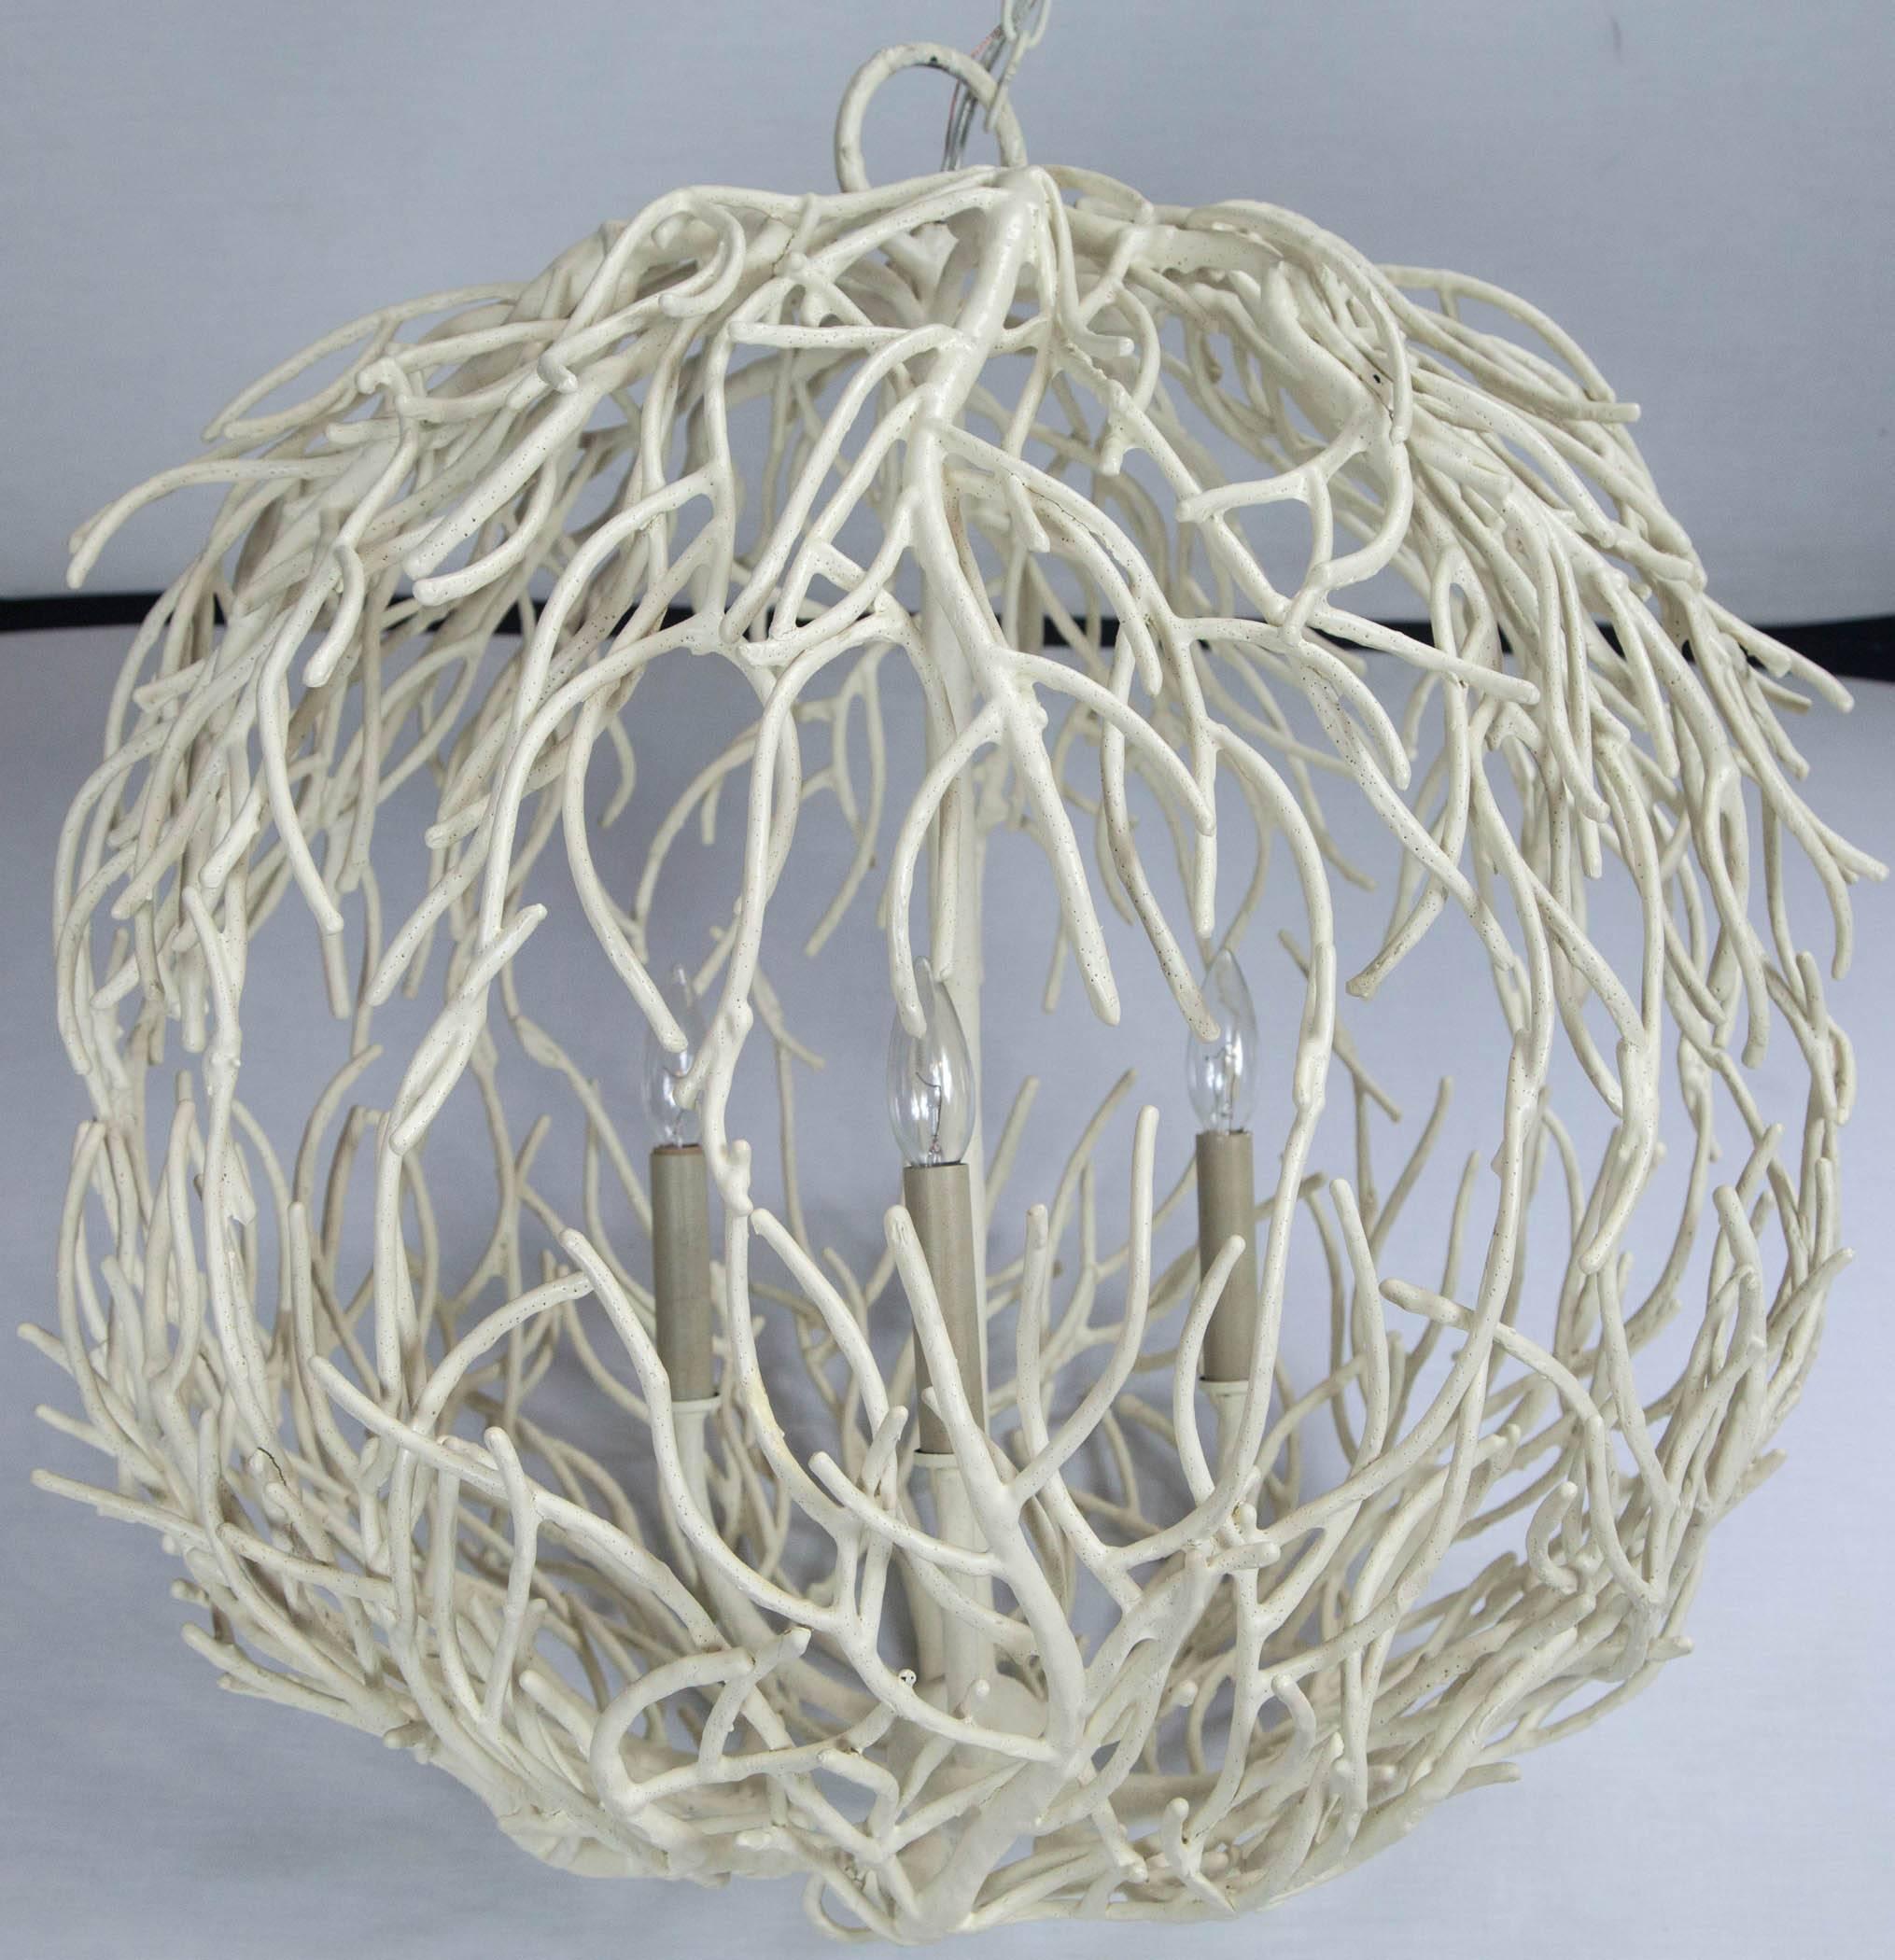 Coral or Twig Globe Pendant Chandelier, Italy 2